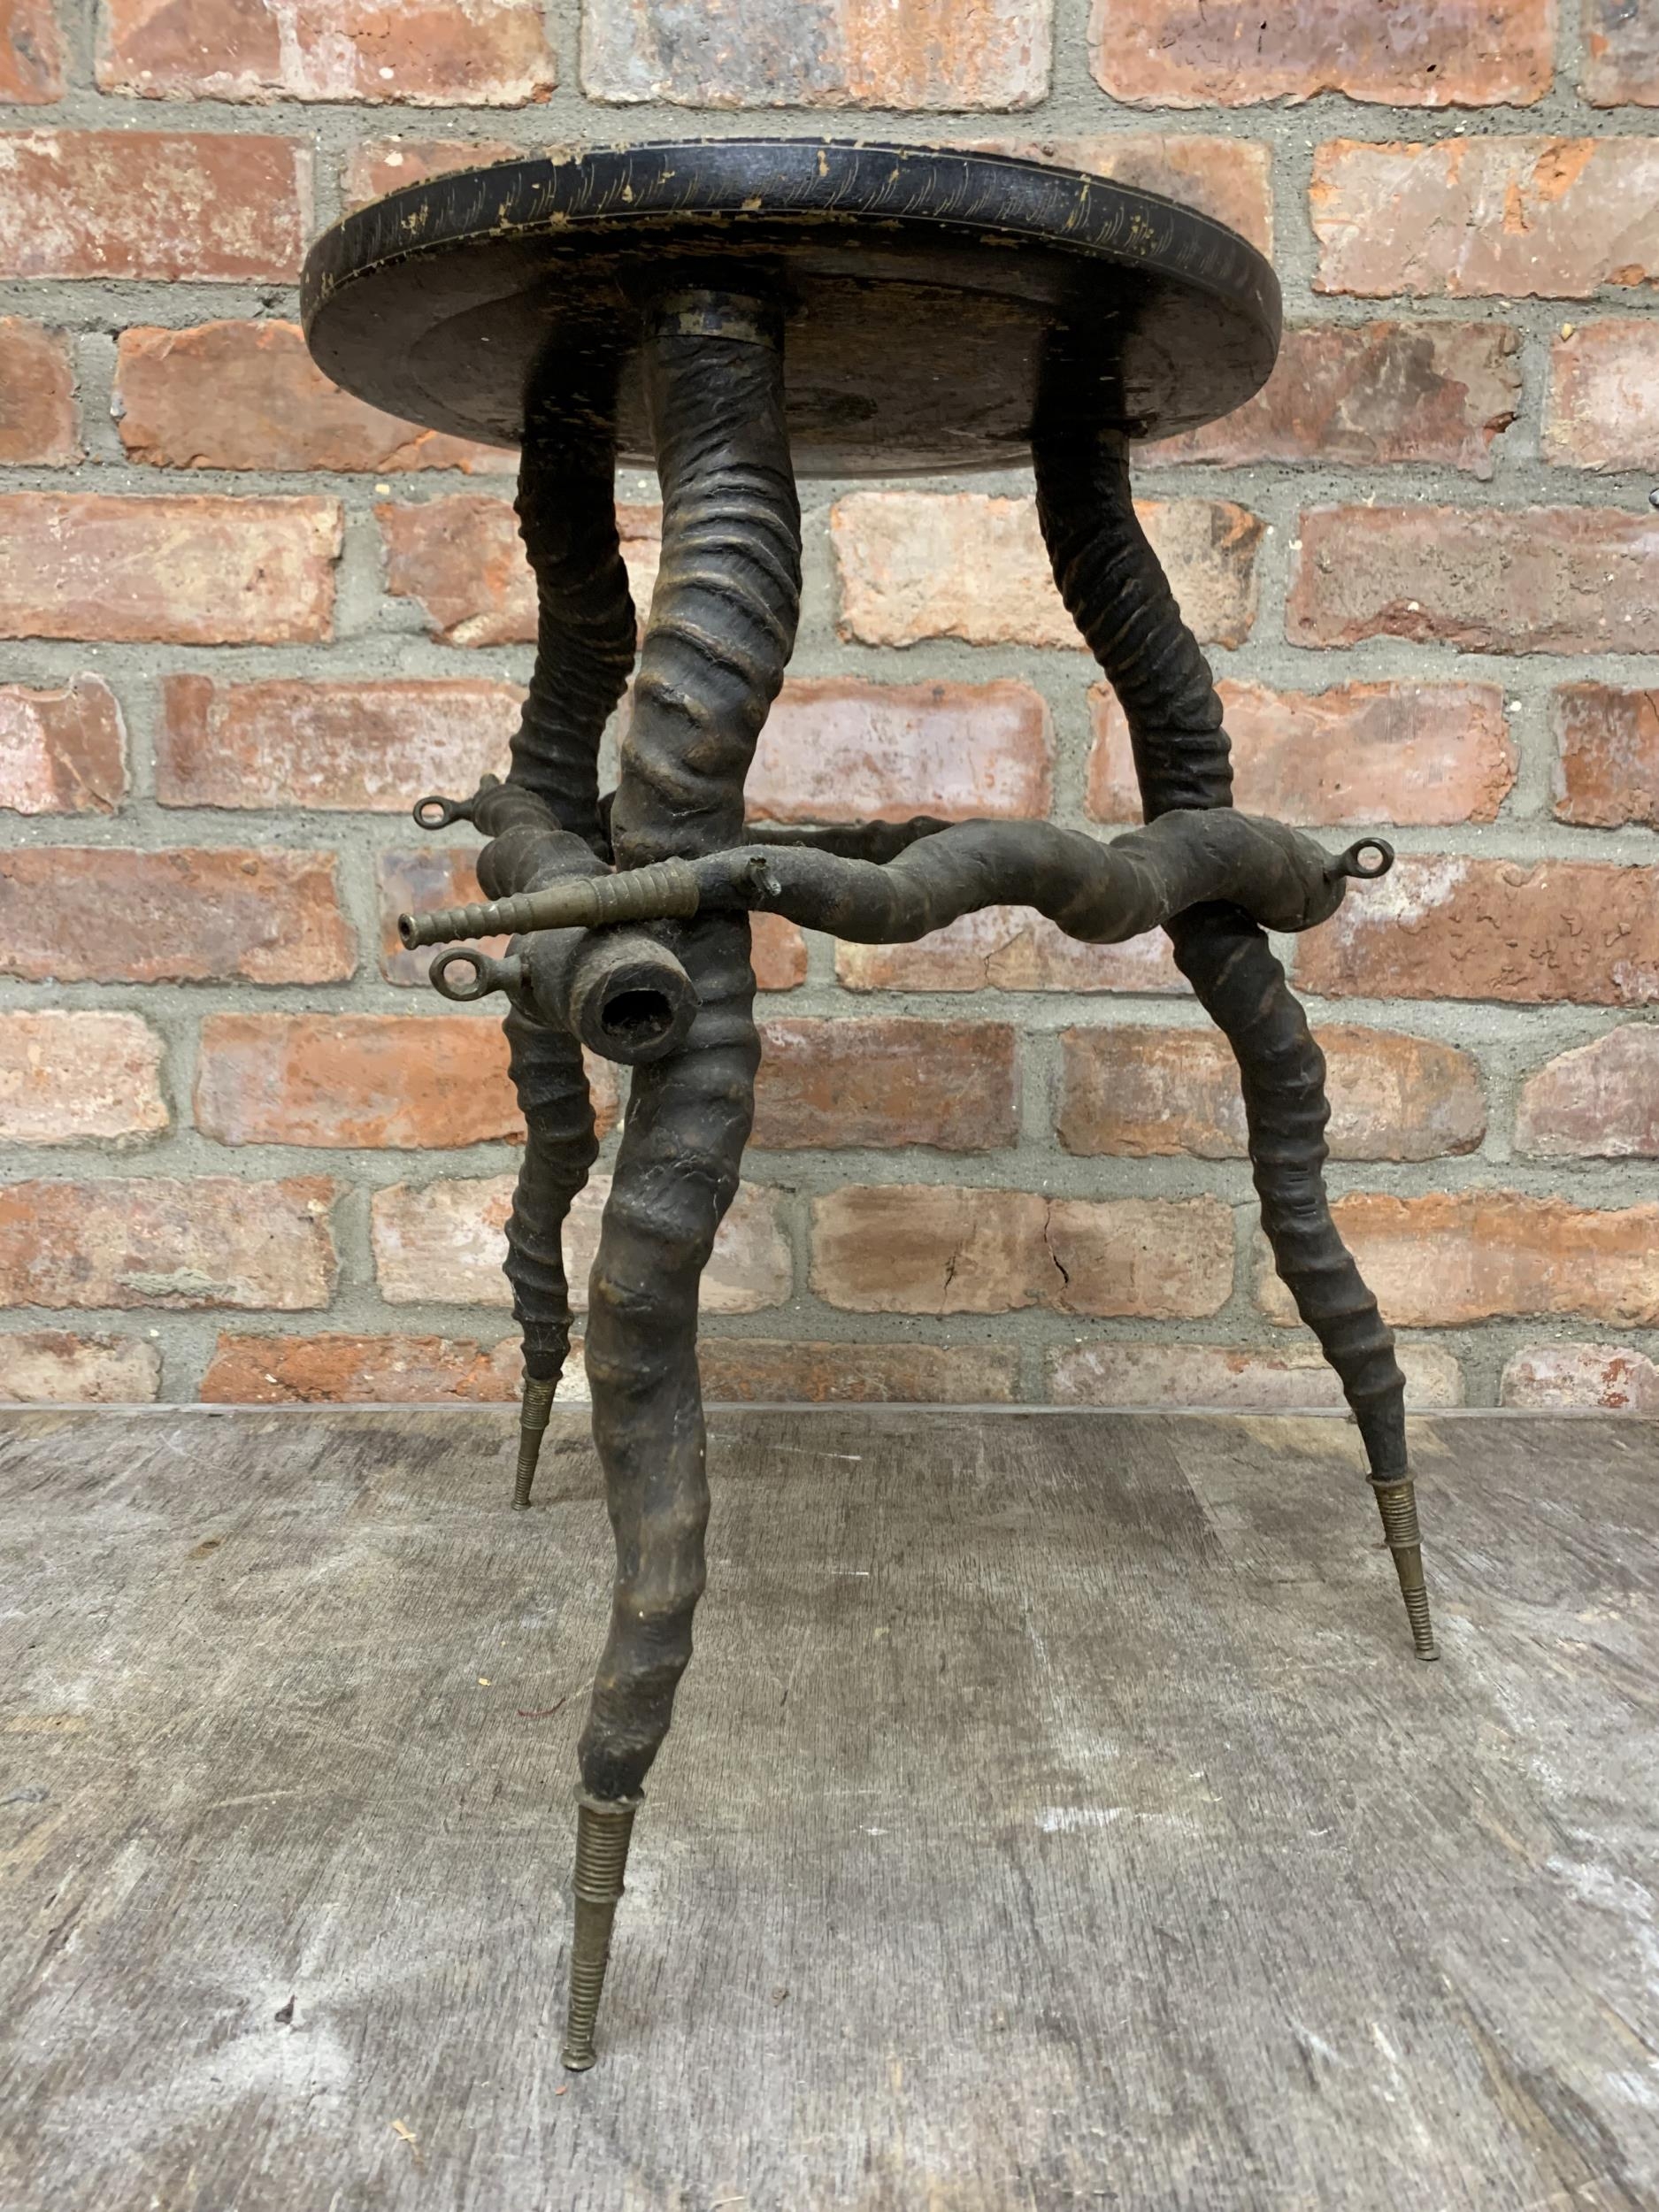 Antique gazelle horn legged table with chess board top, H 47cm x D 30cm - Image 3 of 3